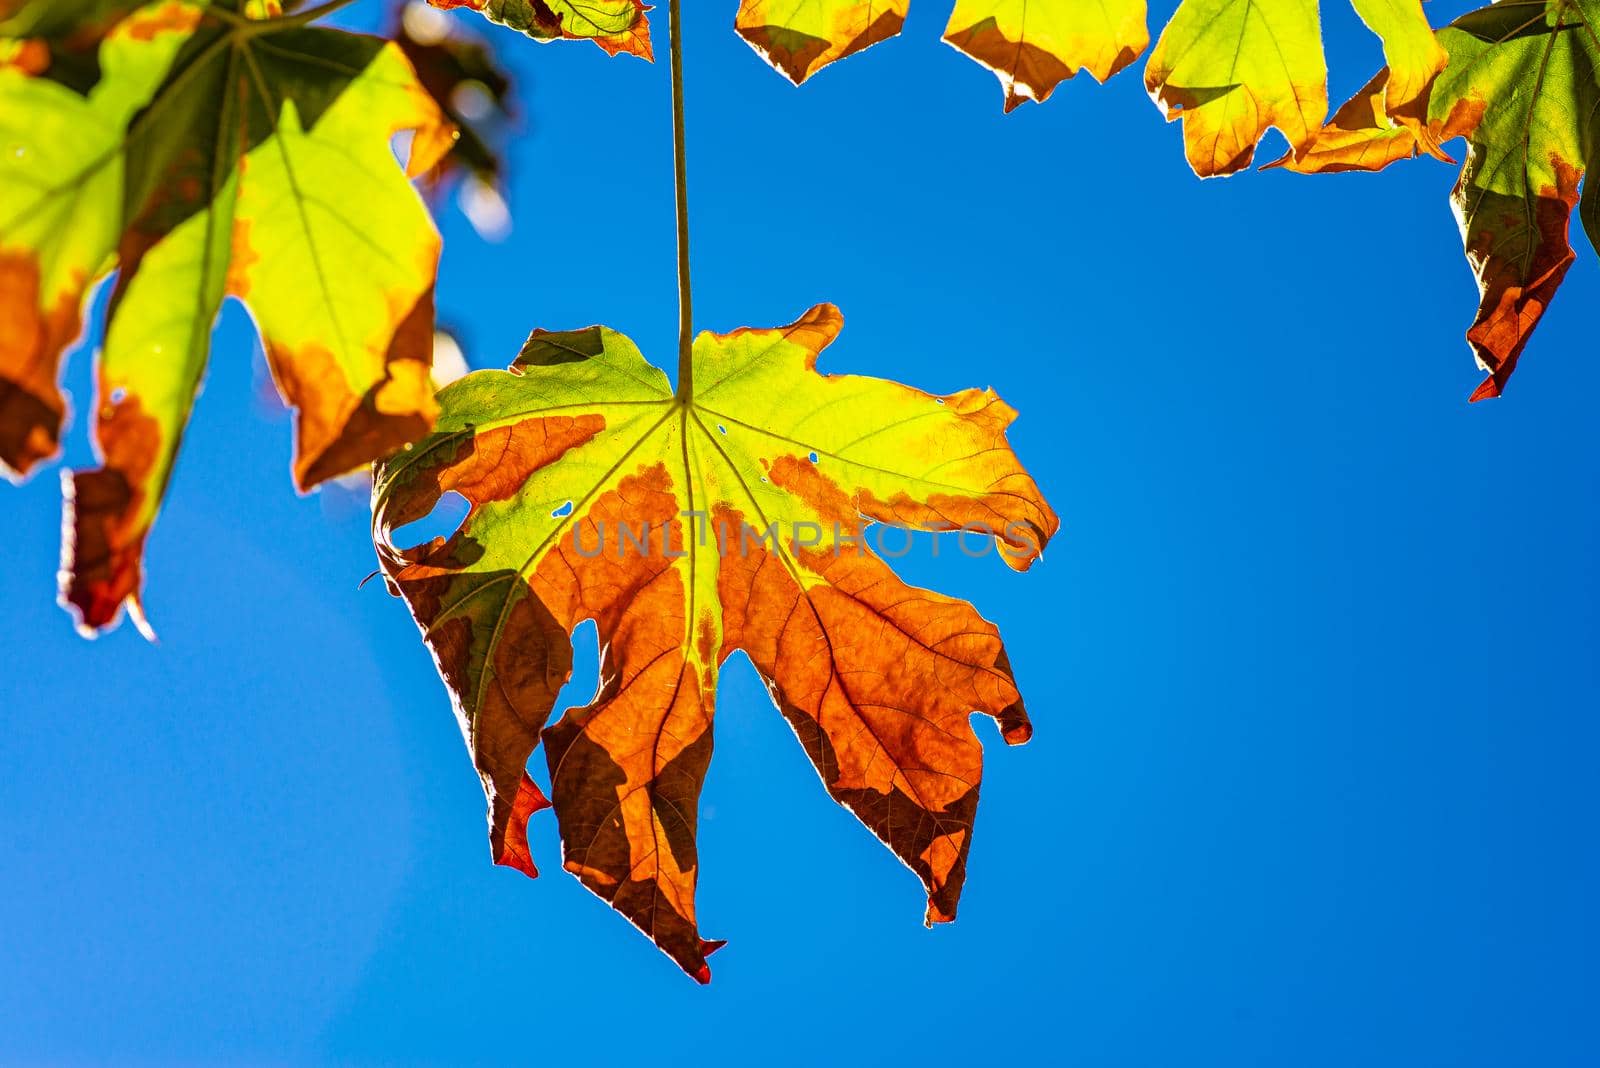 Yellowing maple tree leaves against blue sky on a crisp fall morning by Pendleton